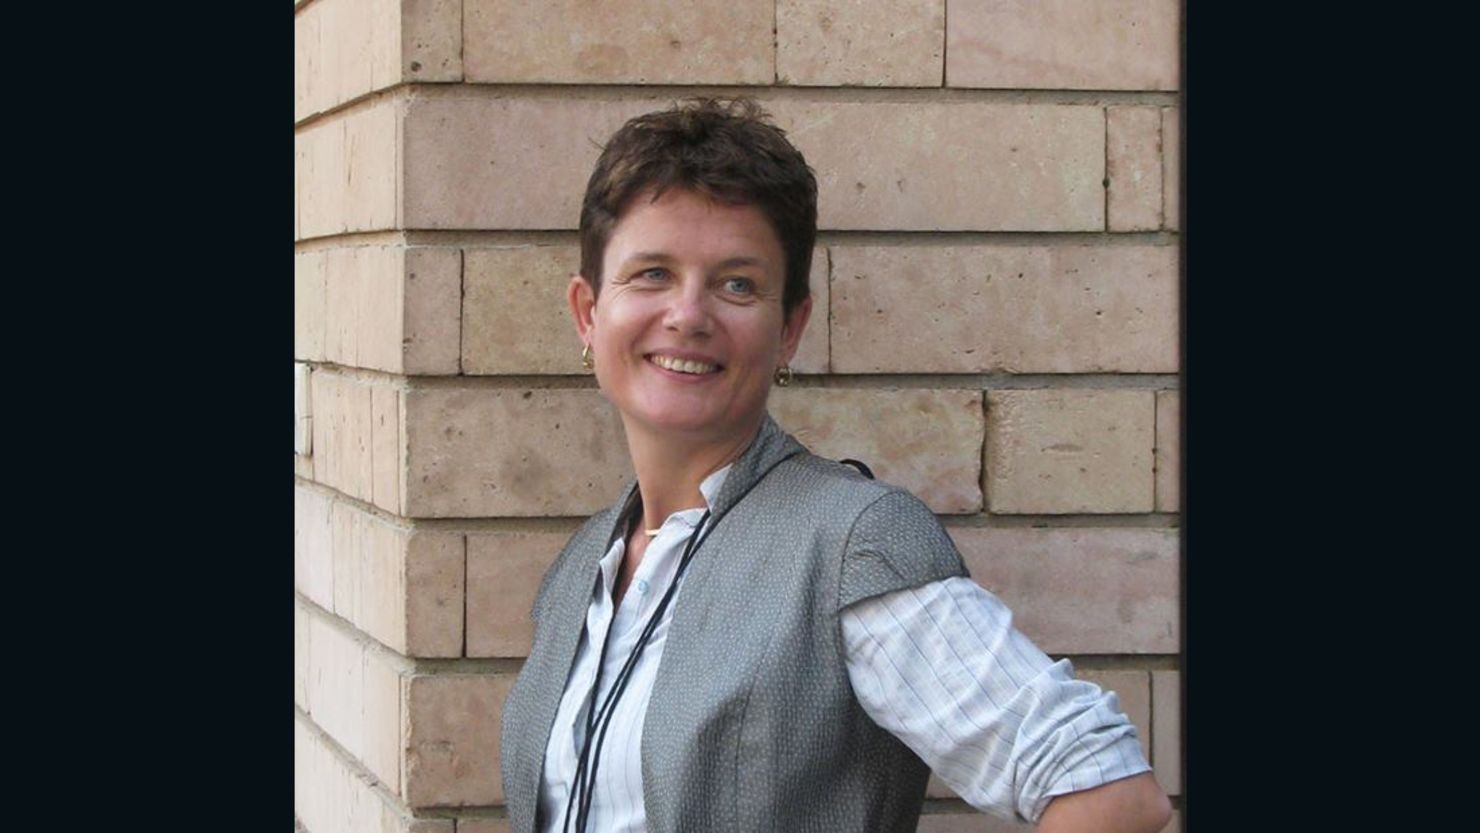 Jacqueline Sutton was the acting country director in Iraq for the Institute for War and Peace Reporting.